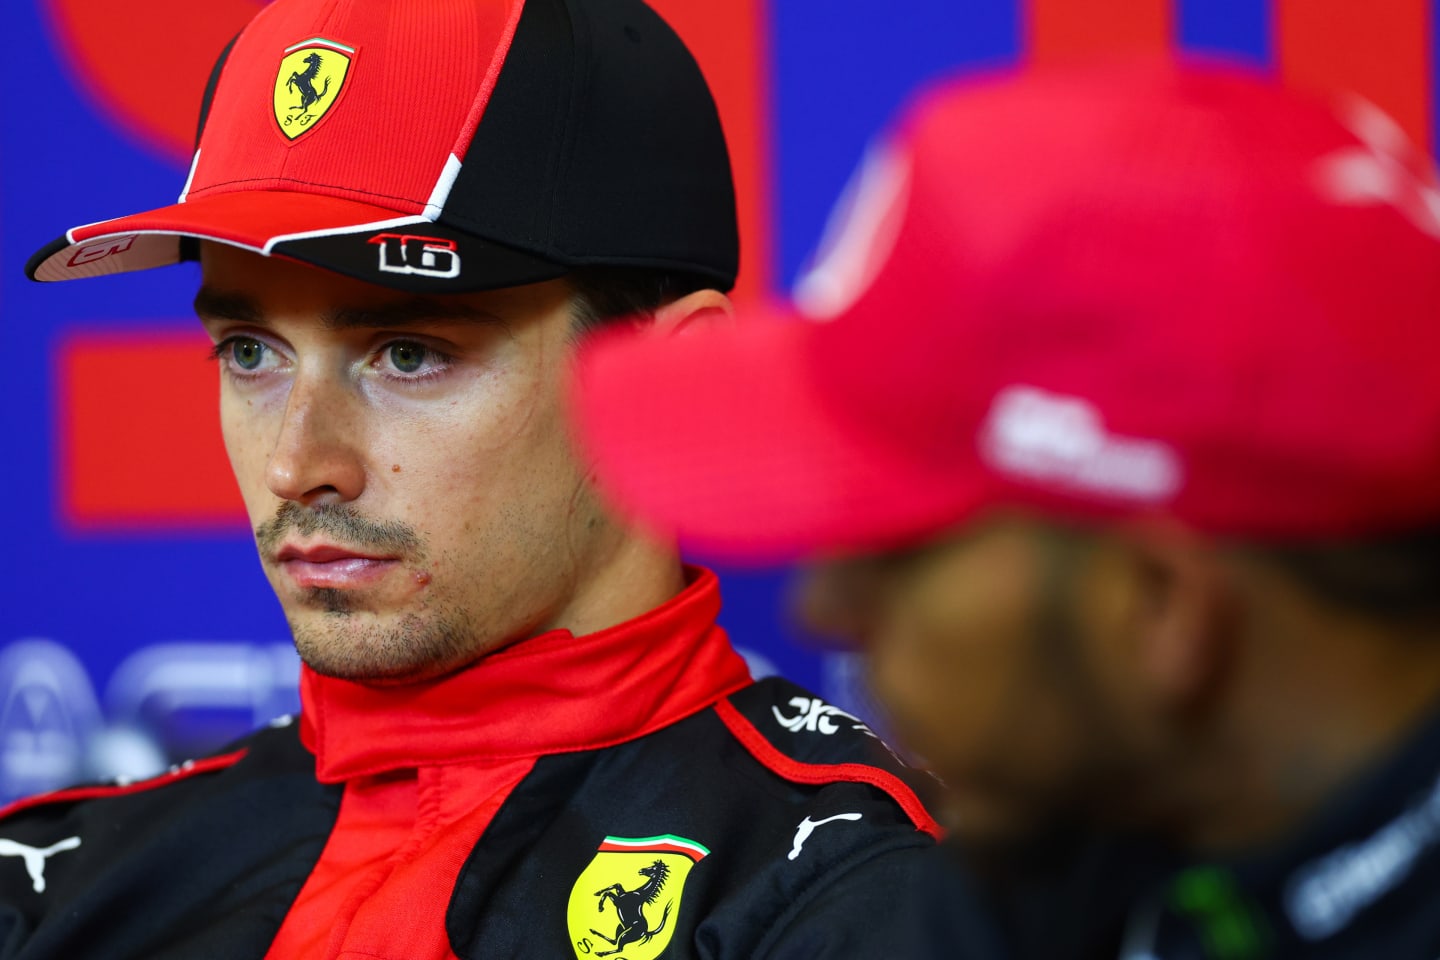 AUSTIN, TEXAS - OCTOBER 20: Pole position qualifier Charles Leclerc of Monaco and Ferrari talks in a press conference after qualifying ahead of the F1 Grand Prix of United States at Circuit of The Americas on October 20, 2023 in Austin, Texas. (Photo by Dan Istitene/Getty Images)